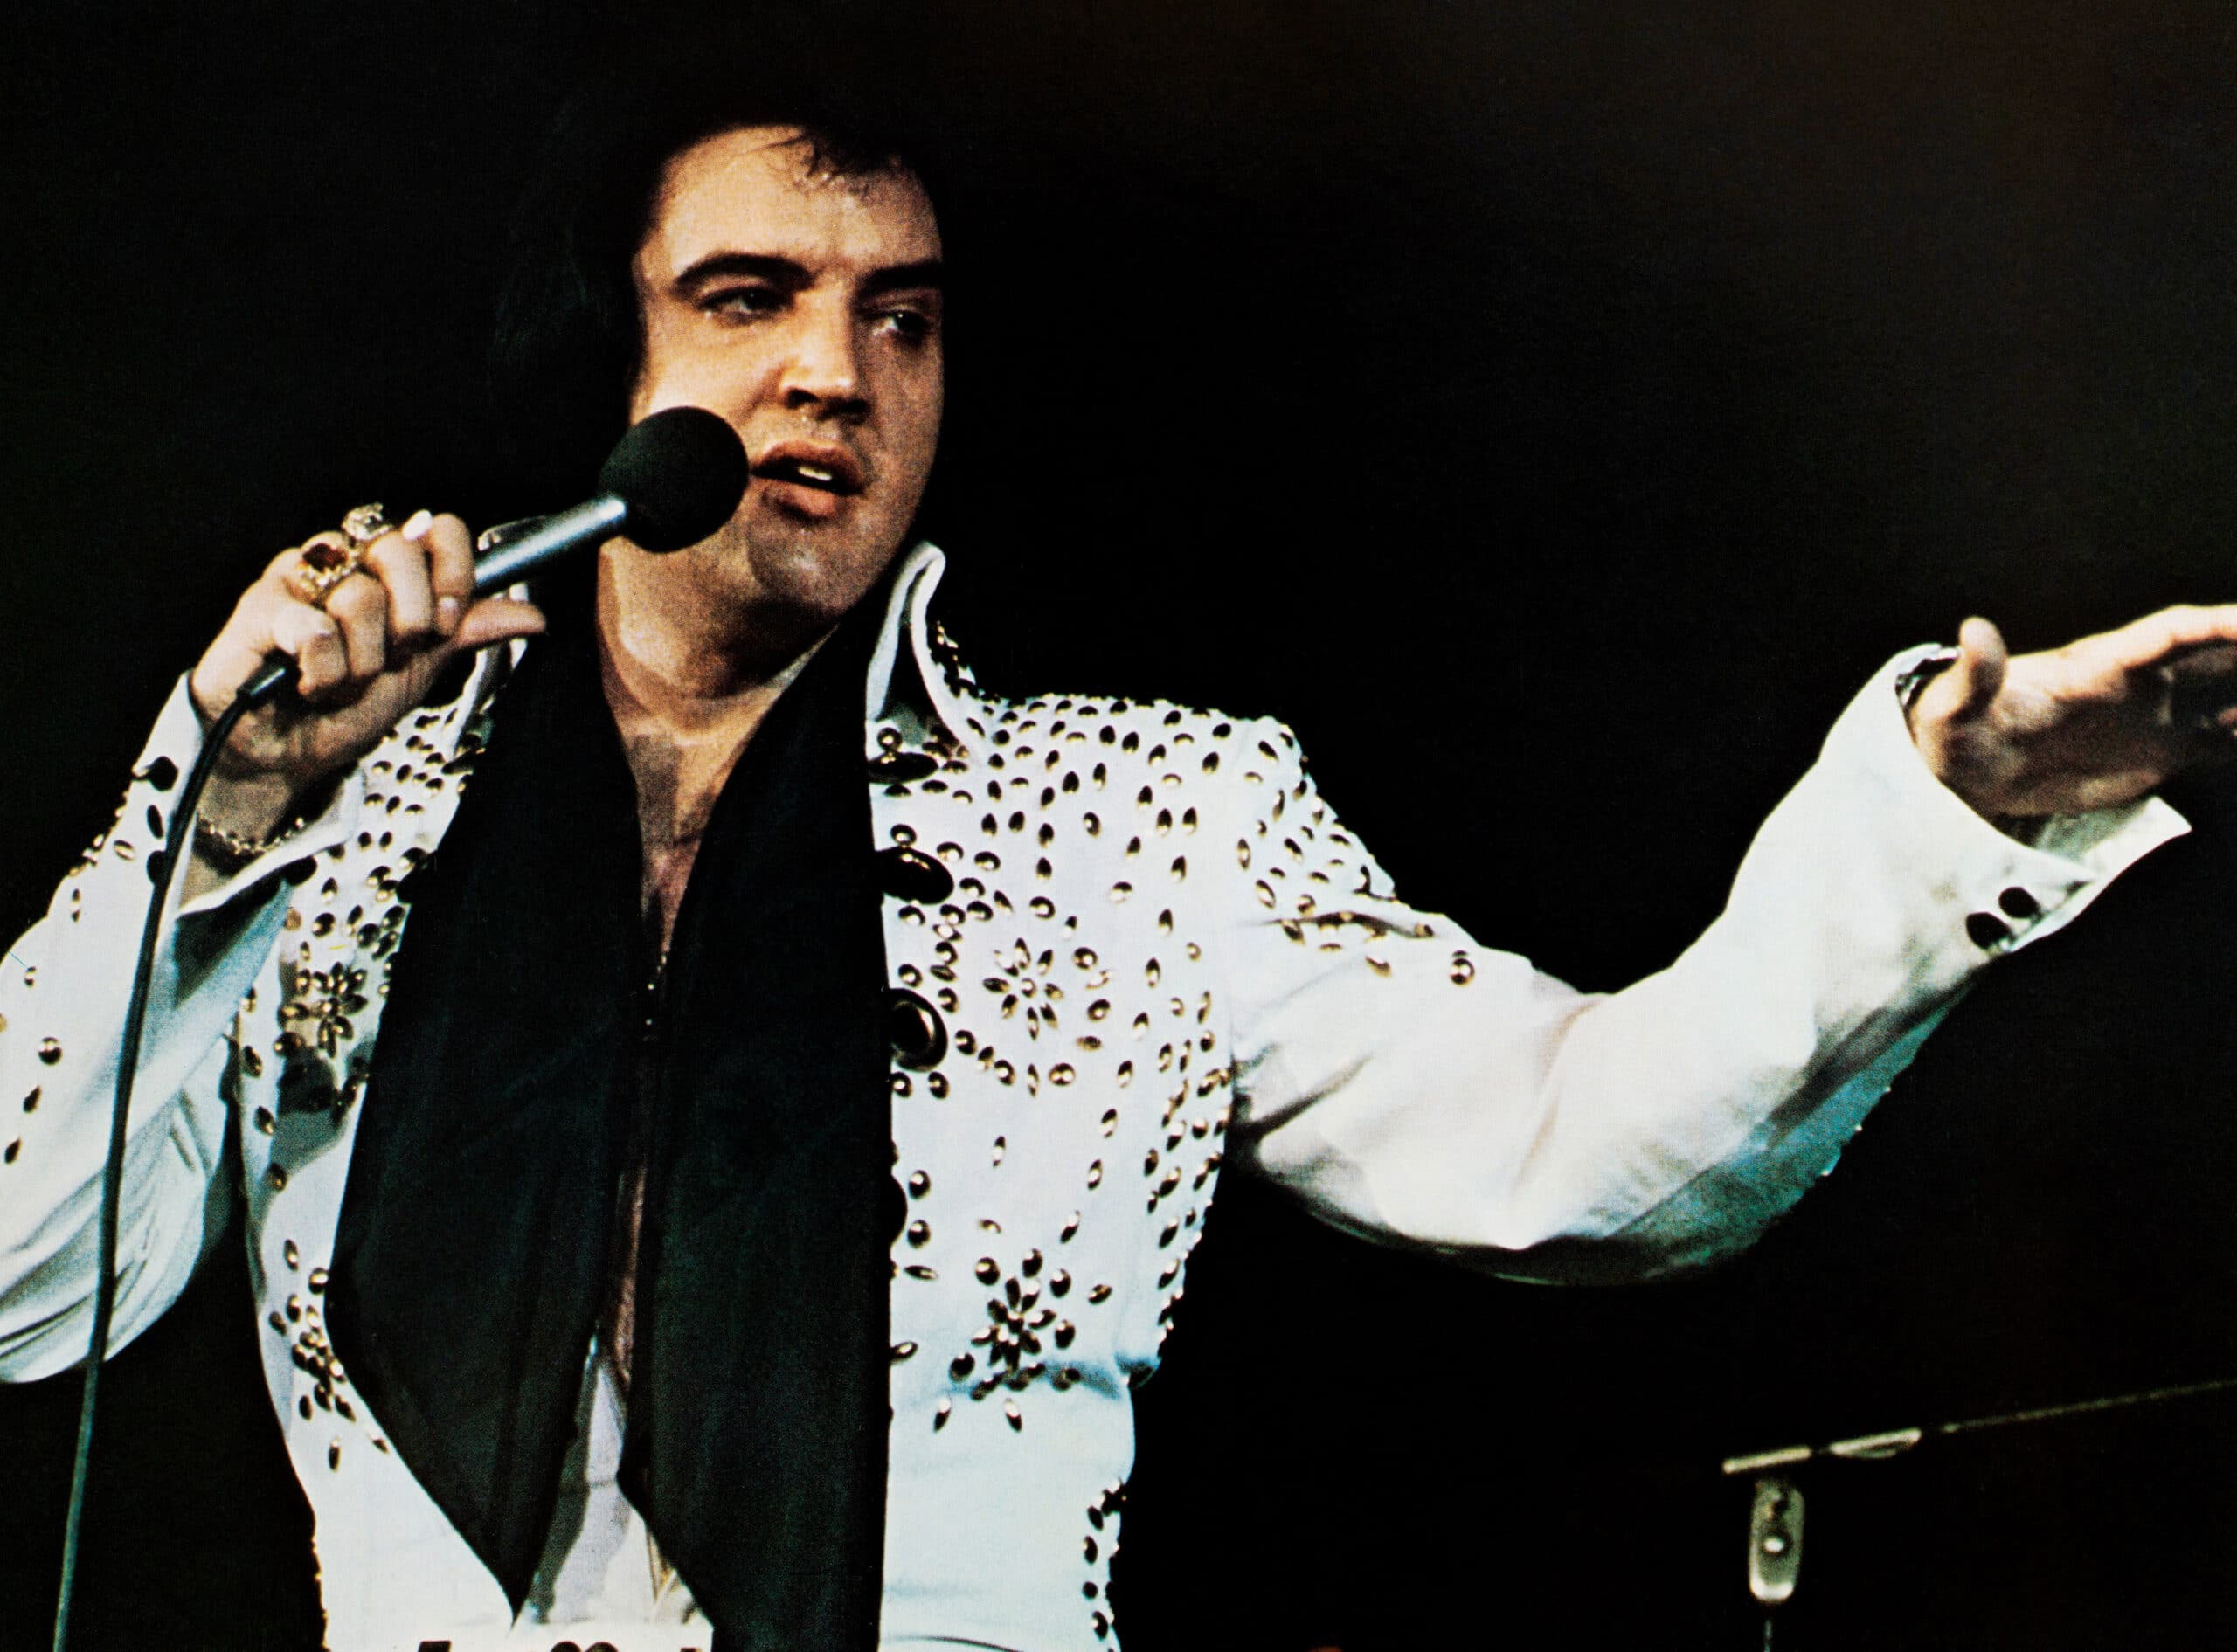 Cousin Of Elvis Presley Claims He Put Farm Animals In His Limousine And That 'He Had Crap All Over Him'